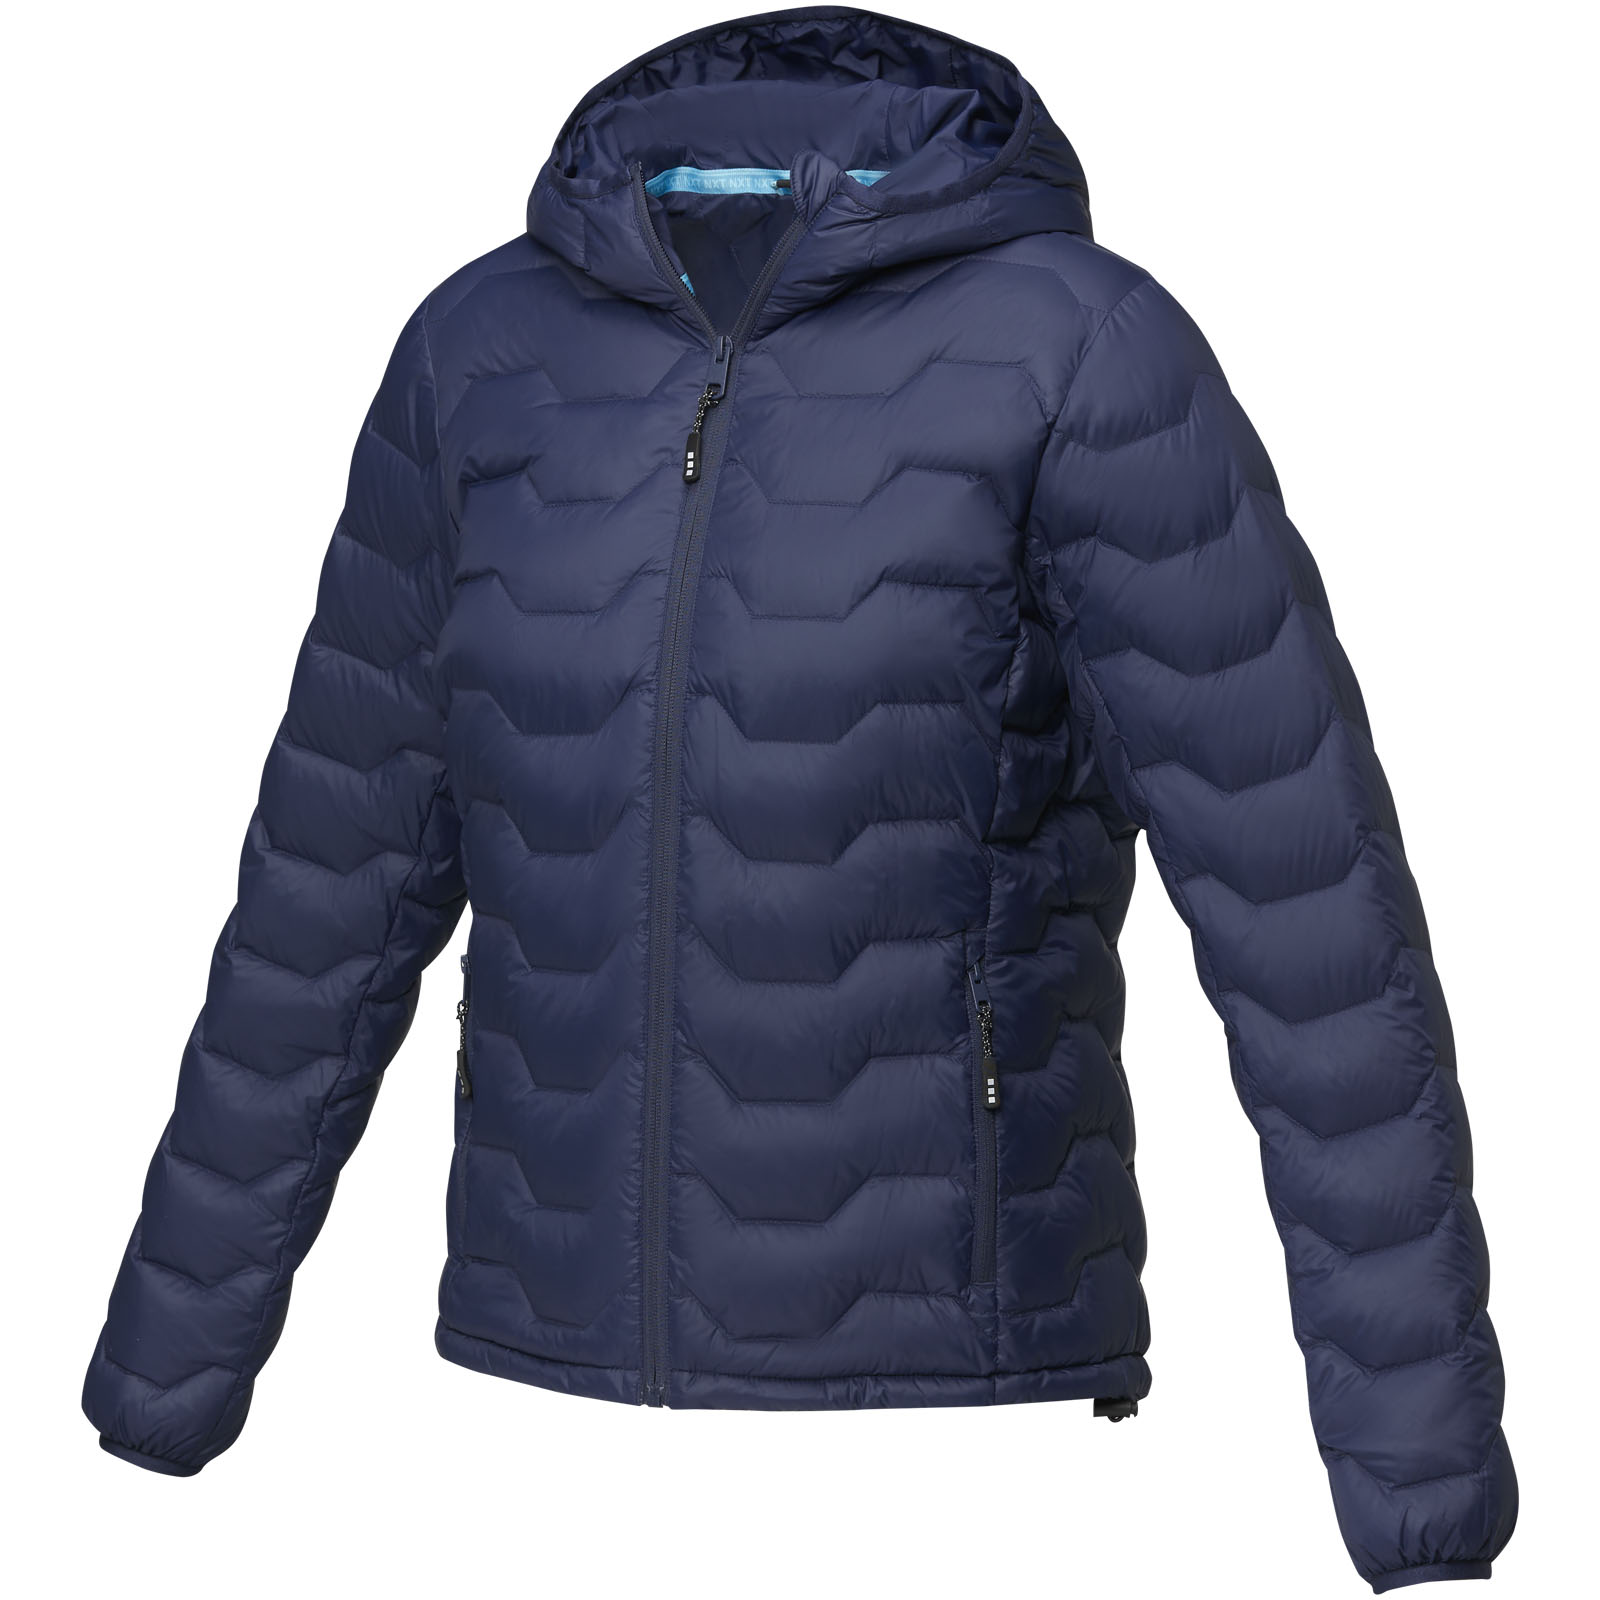 Advertising Jackets - Petalite women's GRS recycled insulated down jacket - 0